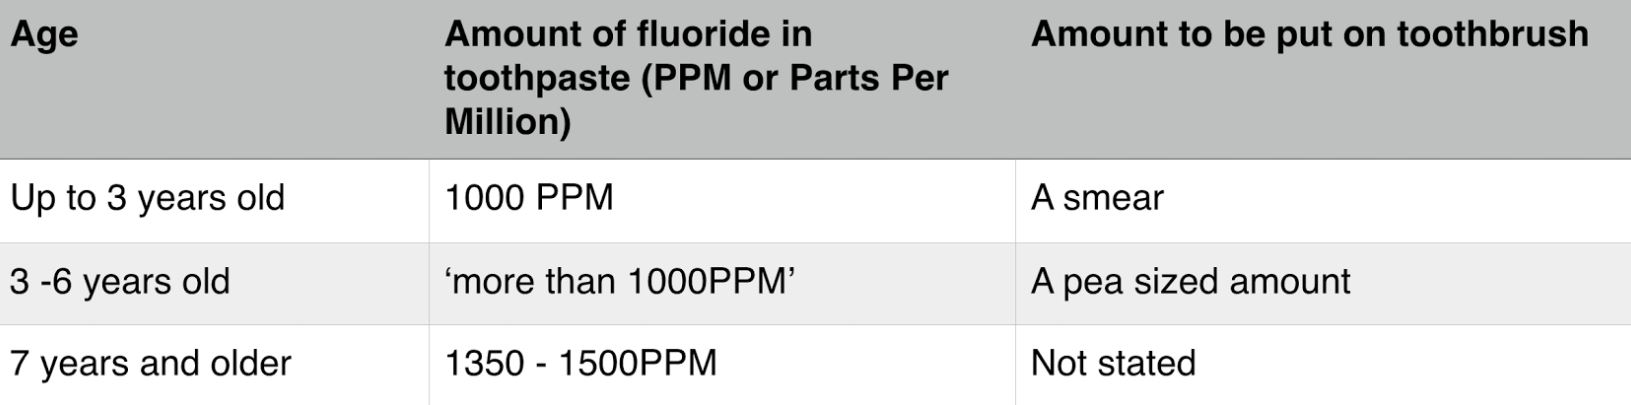 amount of fluoride in toothpaste